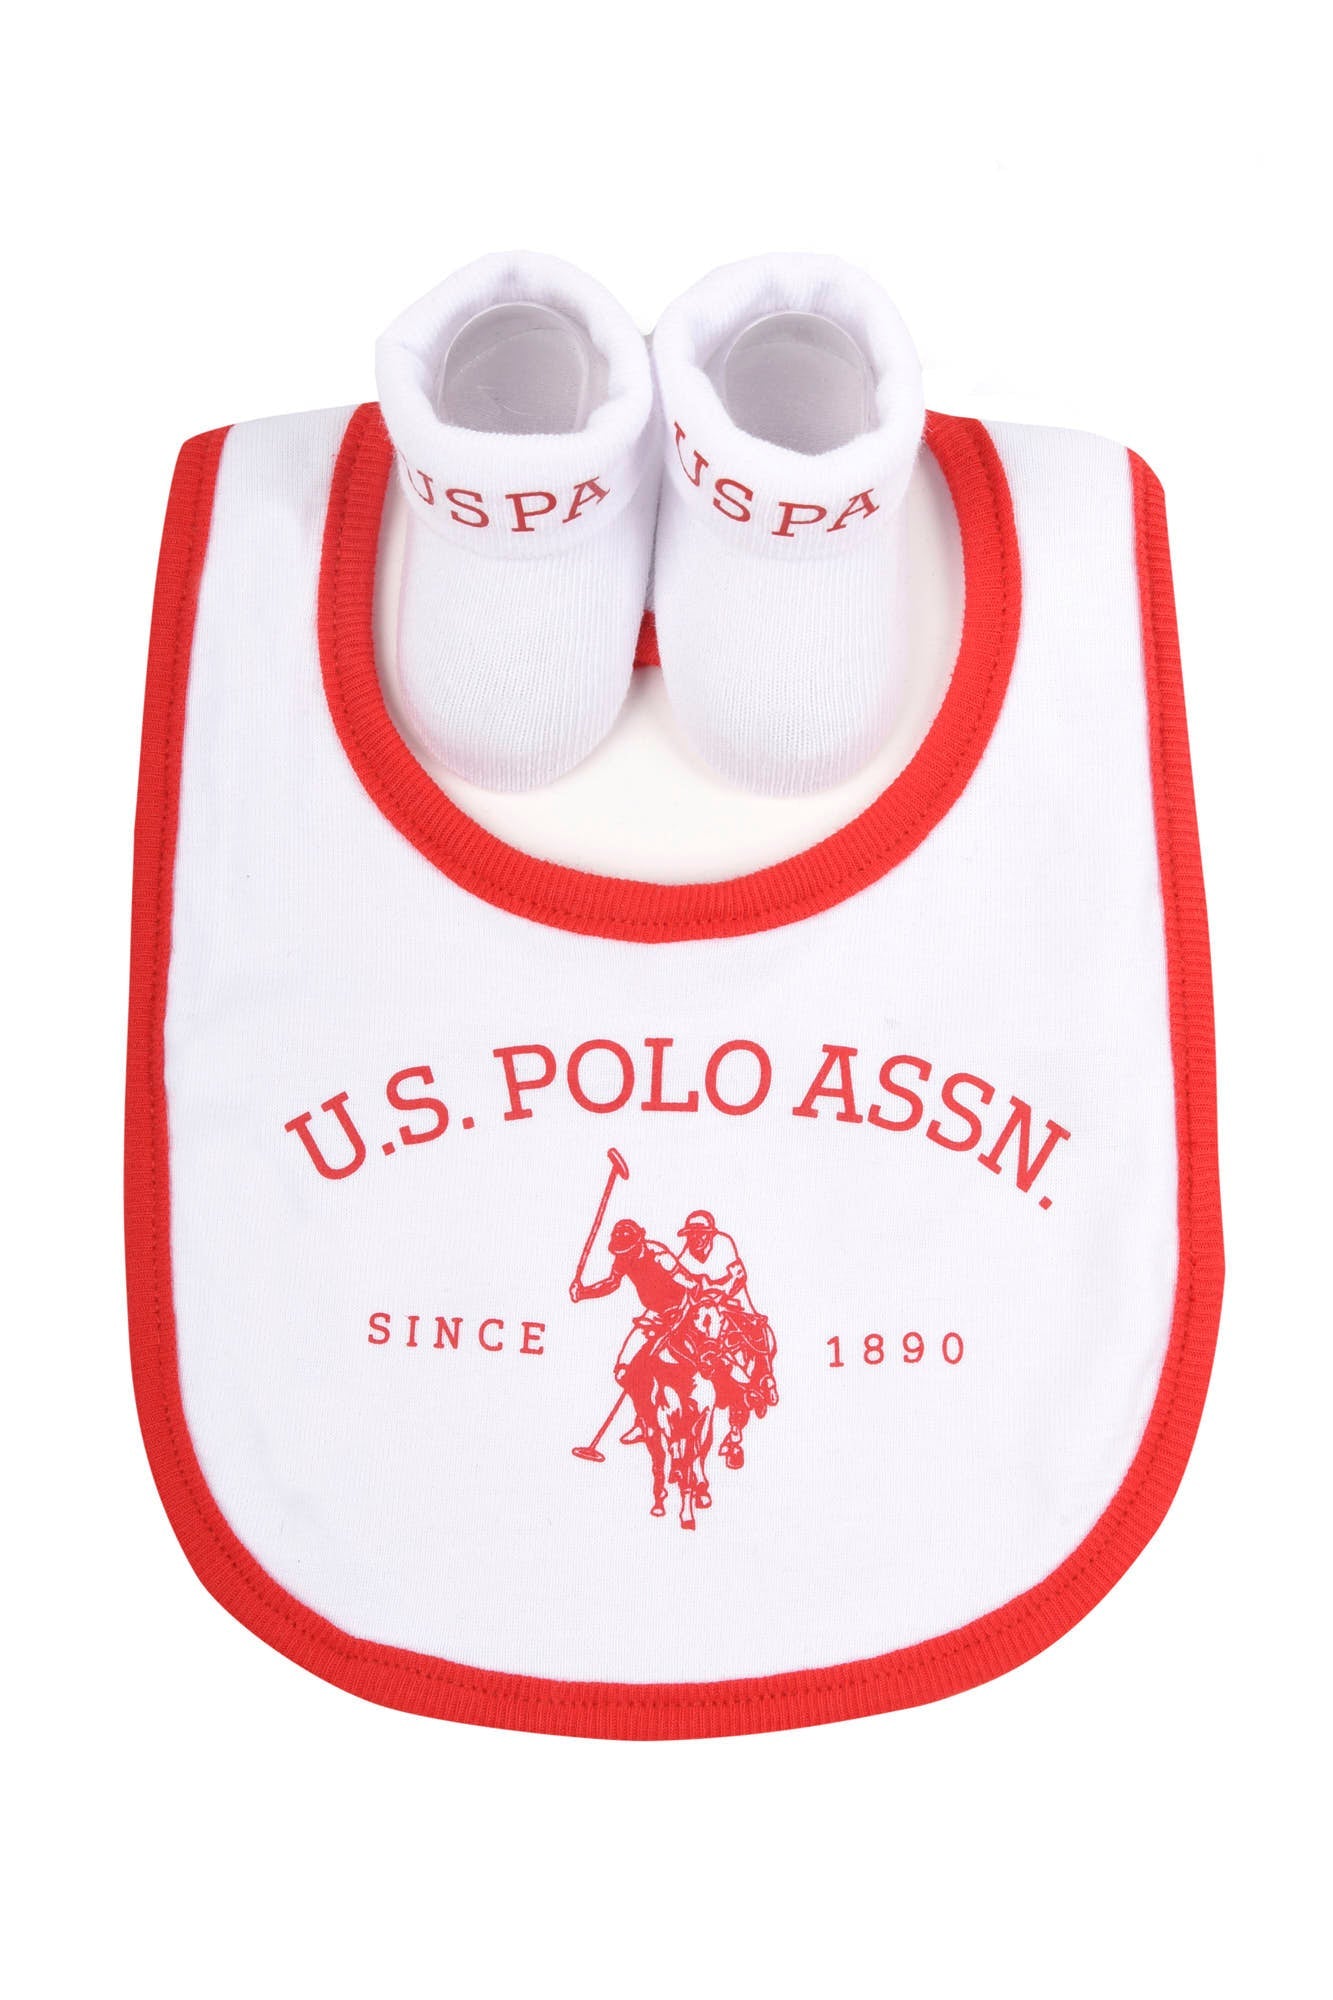 U.S. Polo Assn. Baby Bib and Bootie set in Bright White